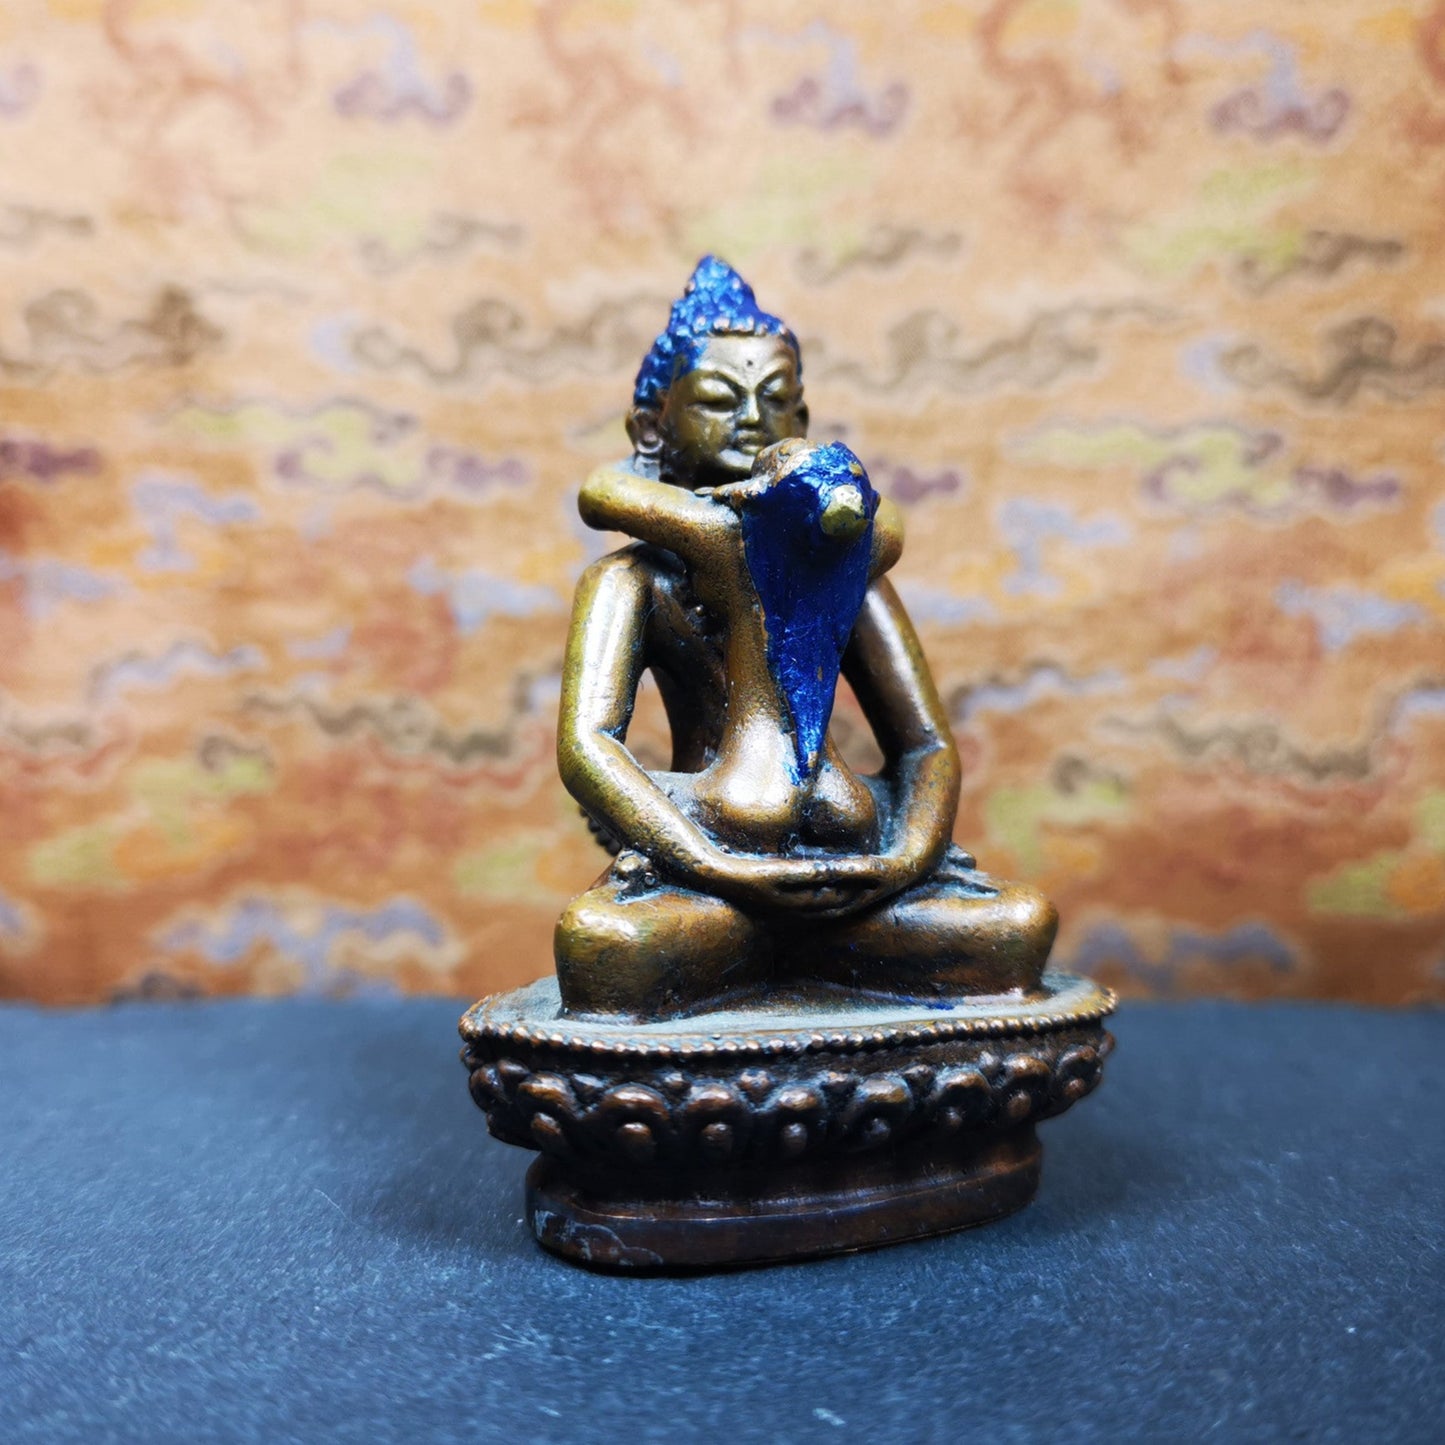 This Samantabhadra Yab Yum statue was handmade in Nepal. It's an old-fashioned statue,made of copper,painted with colors,about 30 years old. In the Nyingma school of Tibetan Buddhism, Samantabhadra is also the name of the Adi-Buddha, often portrayed in indivisible union (yab-yum) with his consort, Samantabhadri.